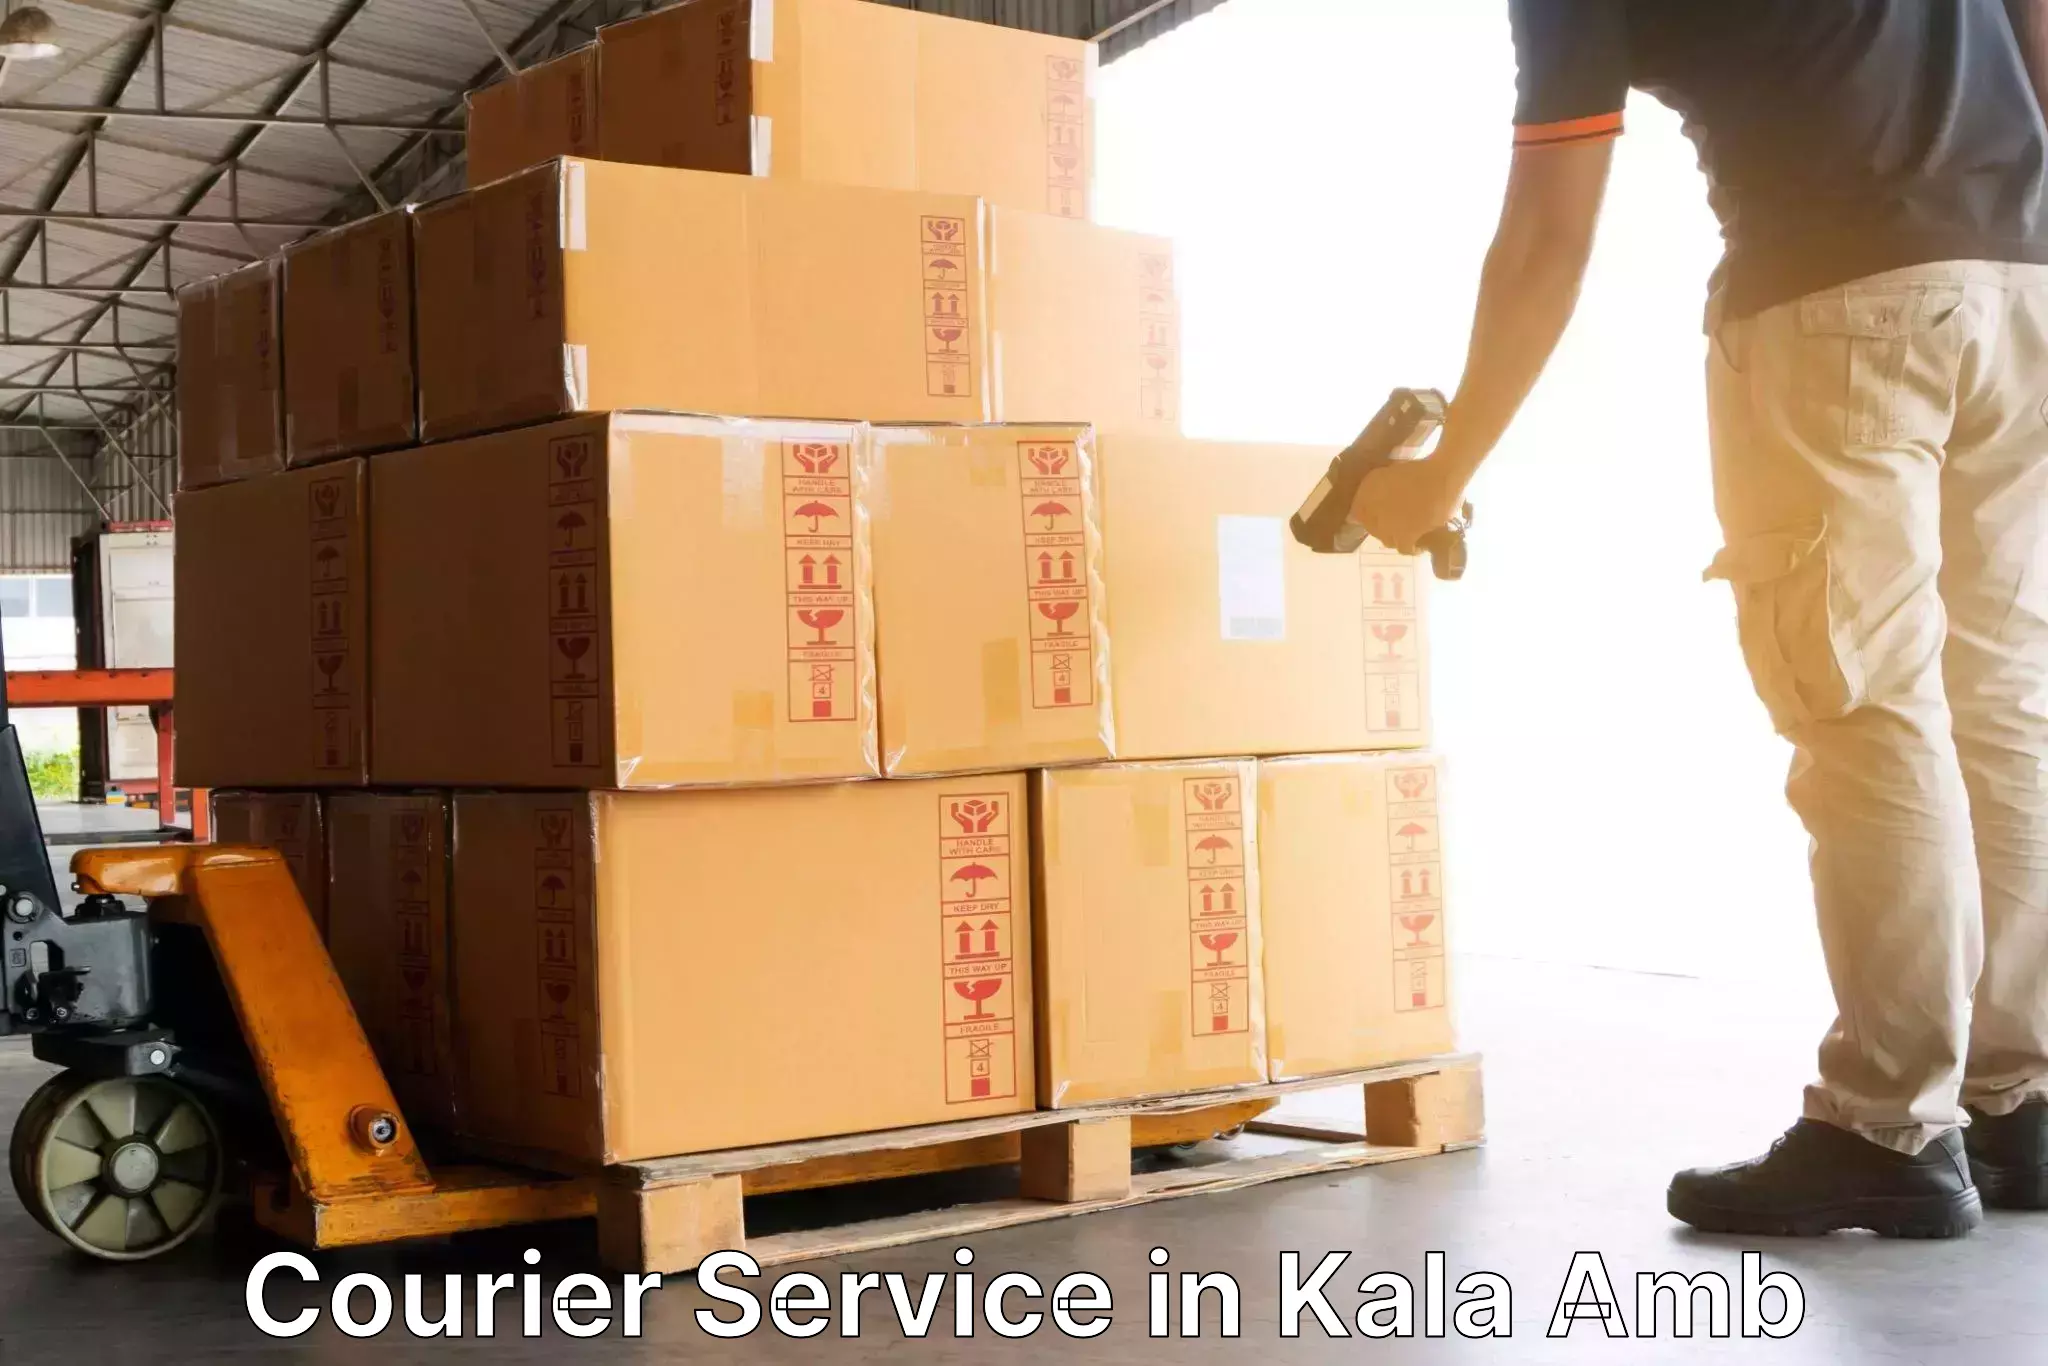 Retail shipping solutions in Kala Amb